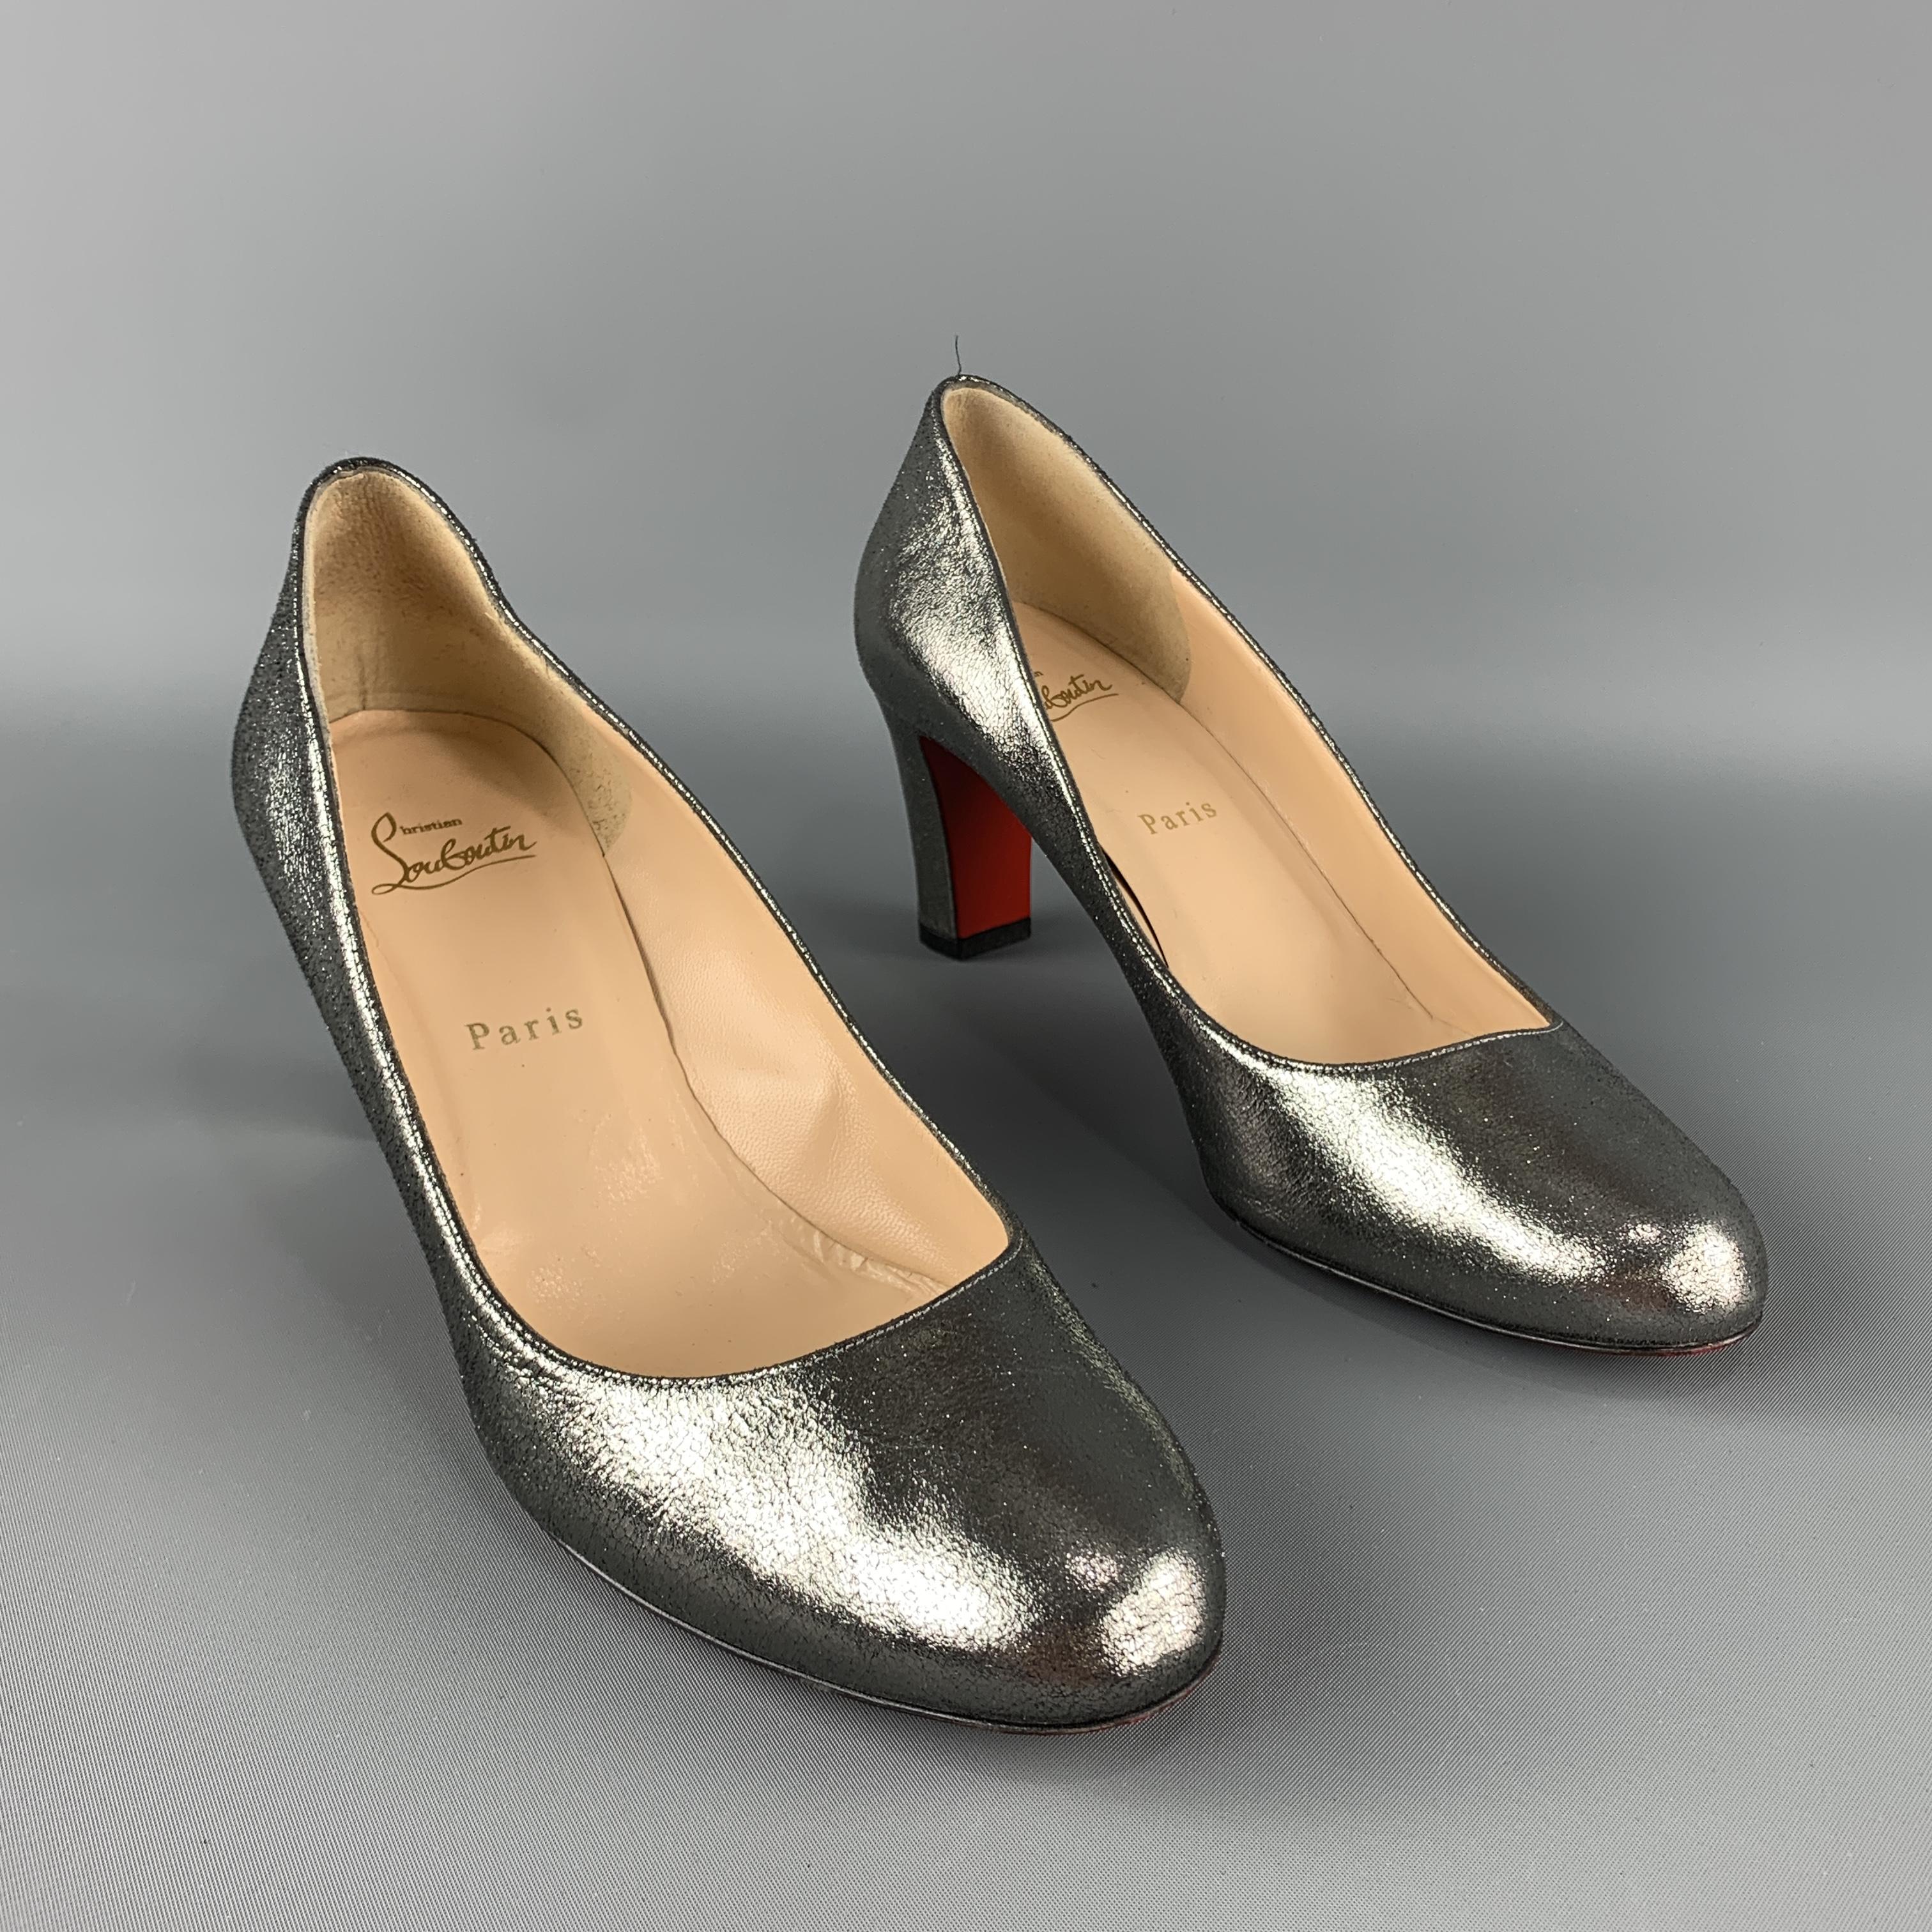 CHRISTIAN LOUBOUTIN Pumps comes in a silver tone in a metallic leather material, with a chunky heel. Made in Italy.
 
Excellent Pre-Owned Condition.
Marked: IT 41
 
Heel: 3 in.